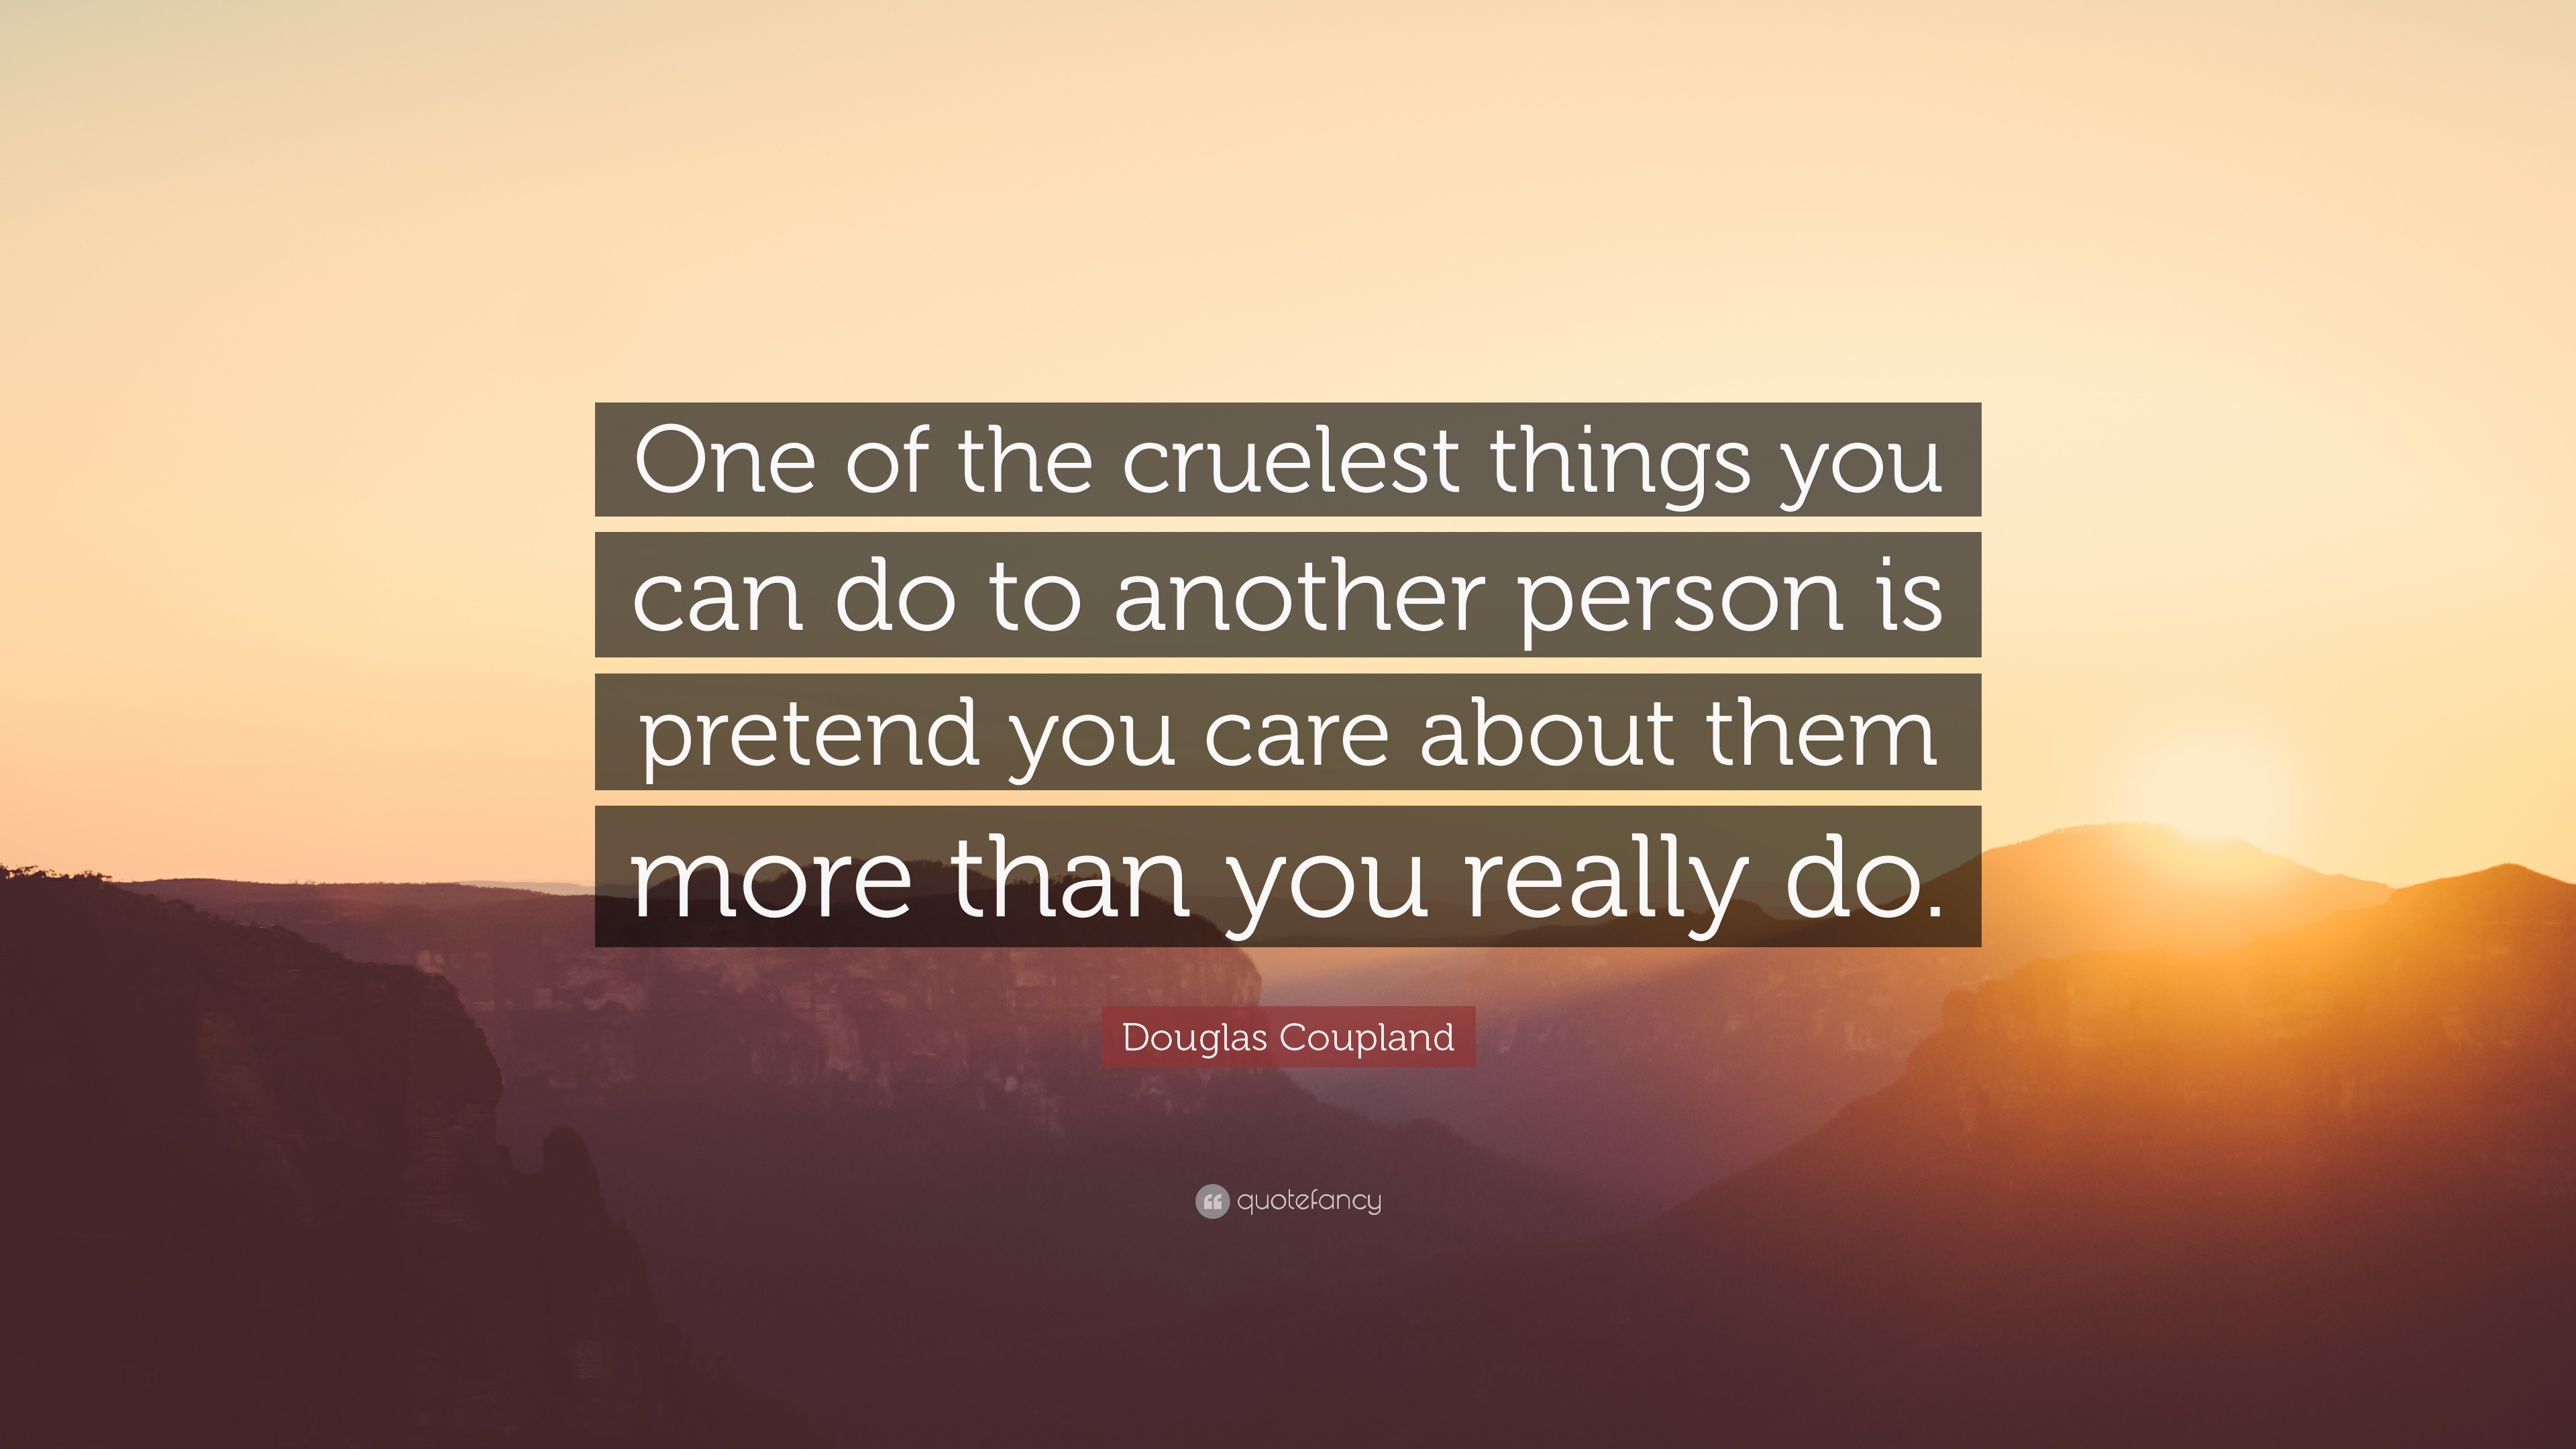 Douglas Coupland Quote: “One of the cruelest things you can do to ...